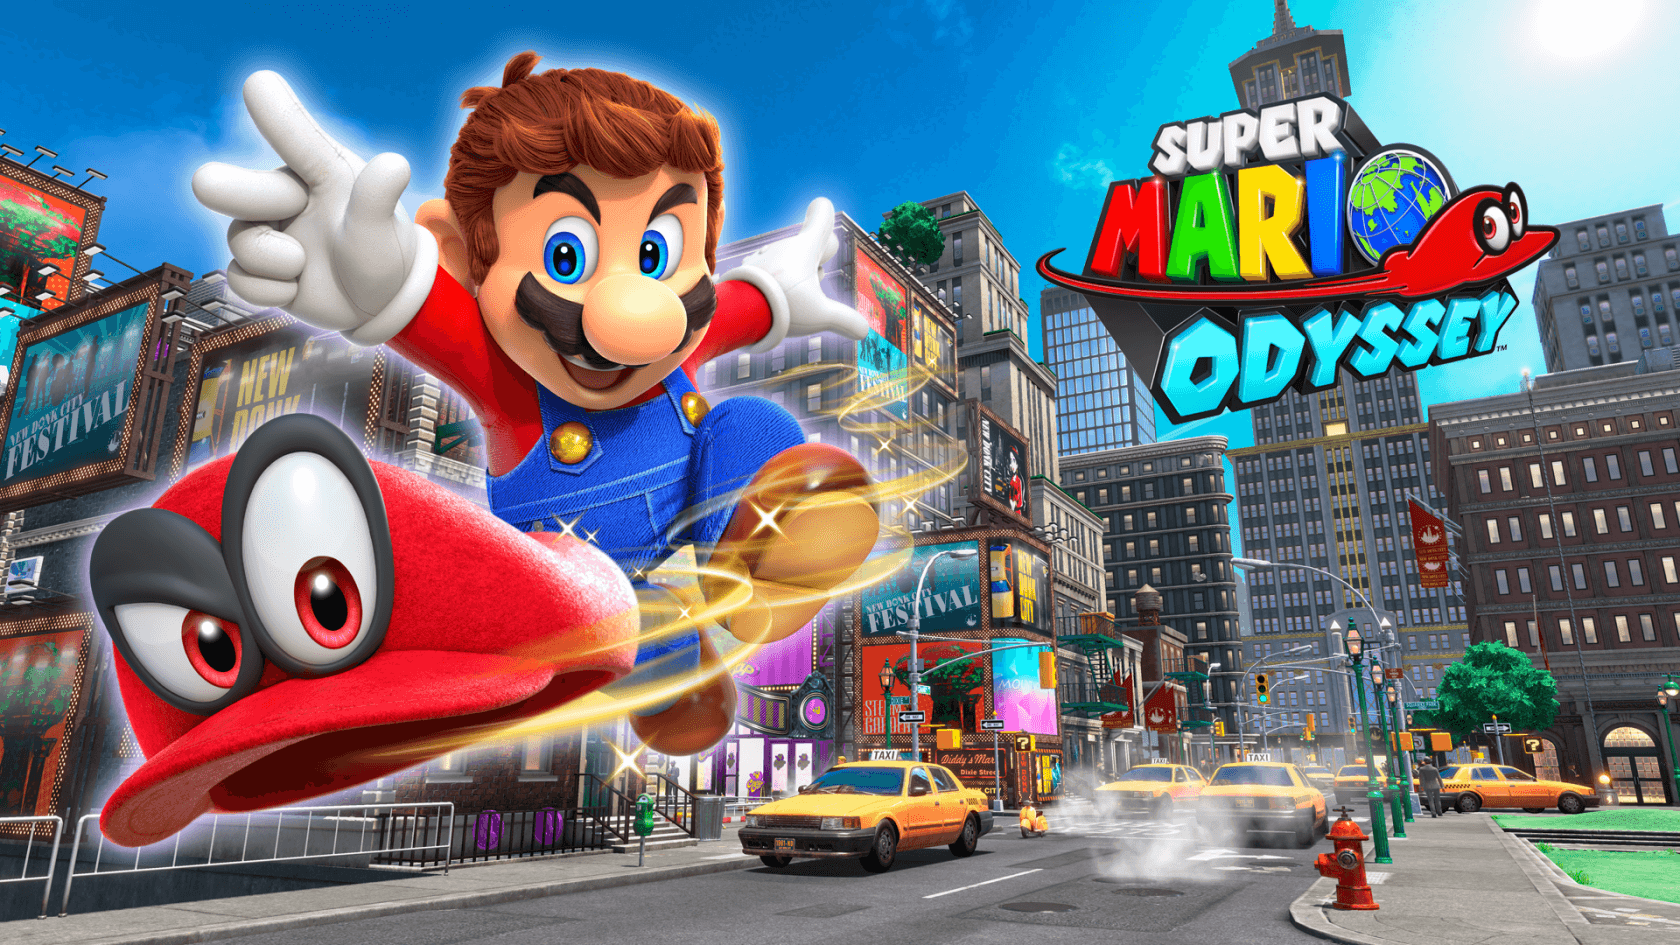 Over 50 percent of Switch users own Super Mario Odyssey, Mario Kart 8, and Breath of the Wild